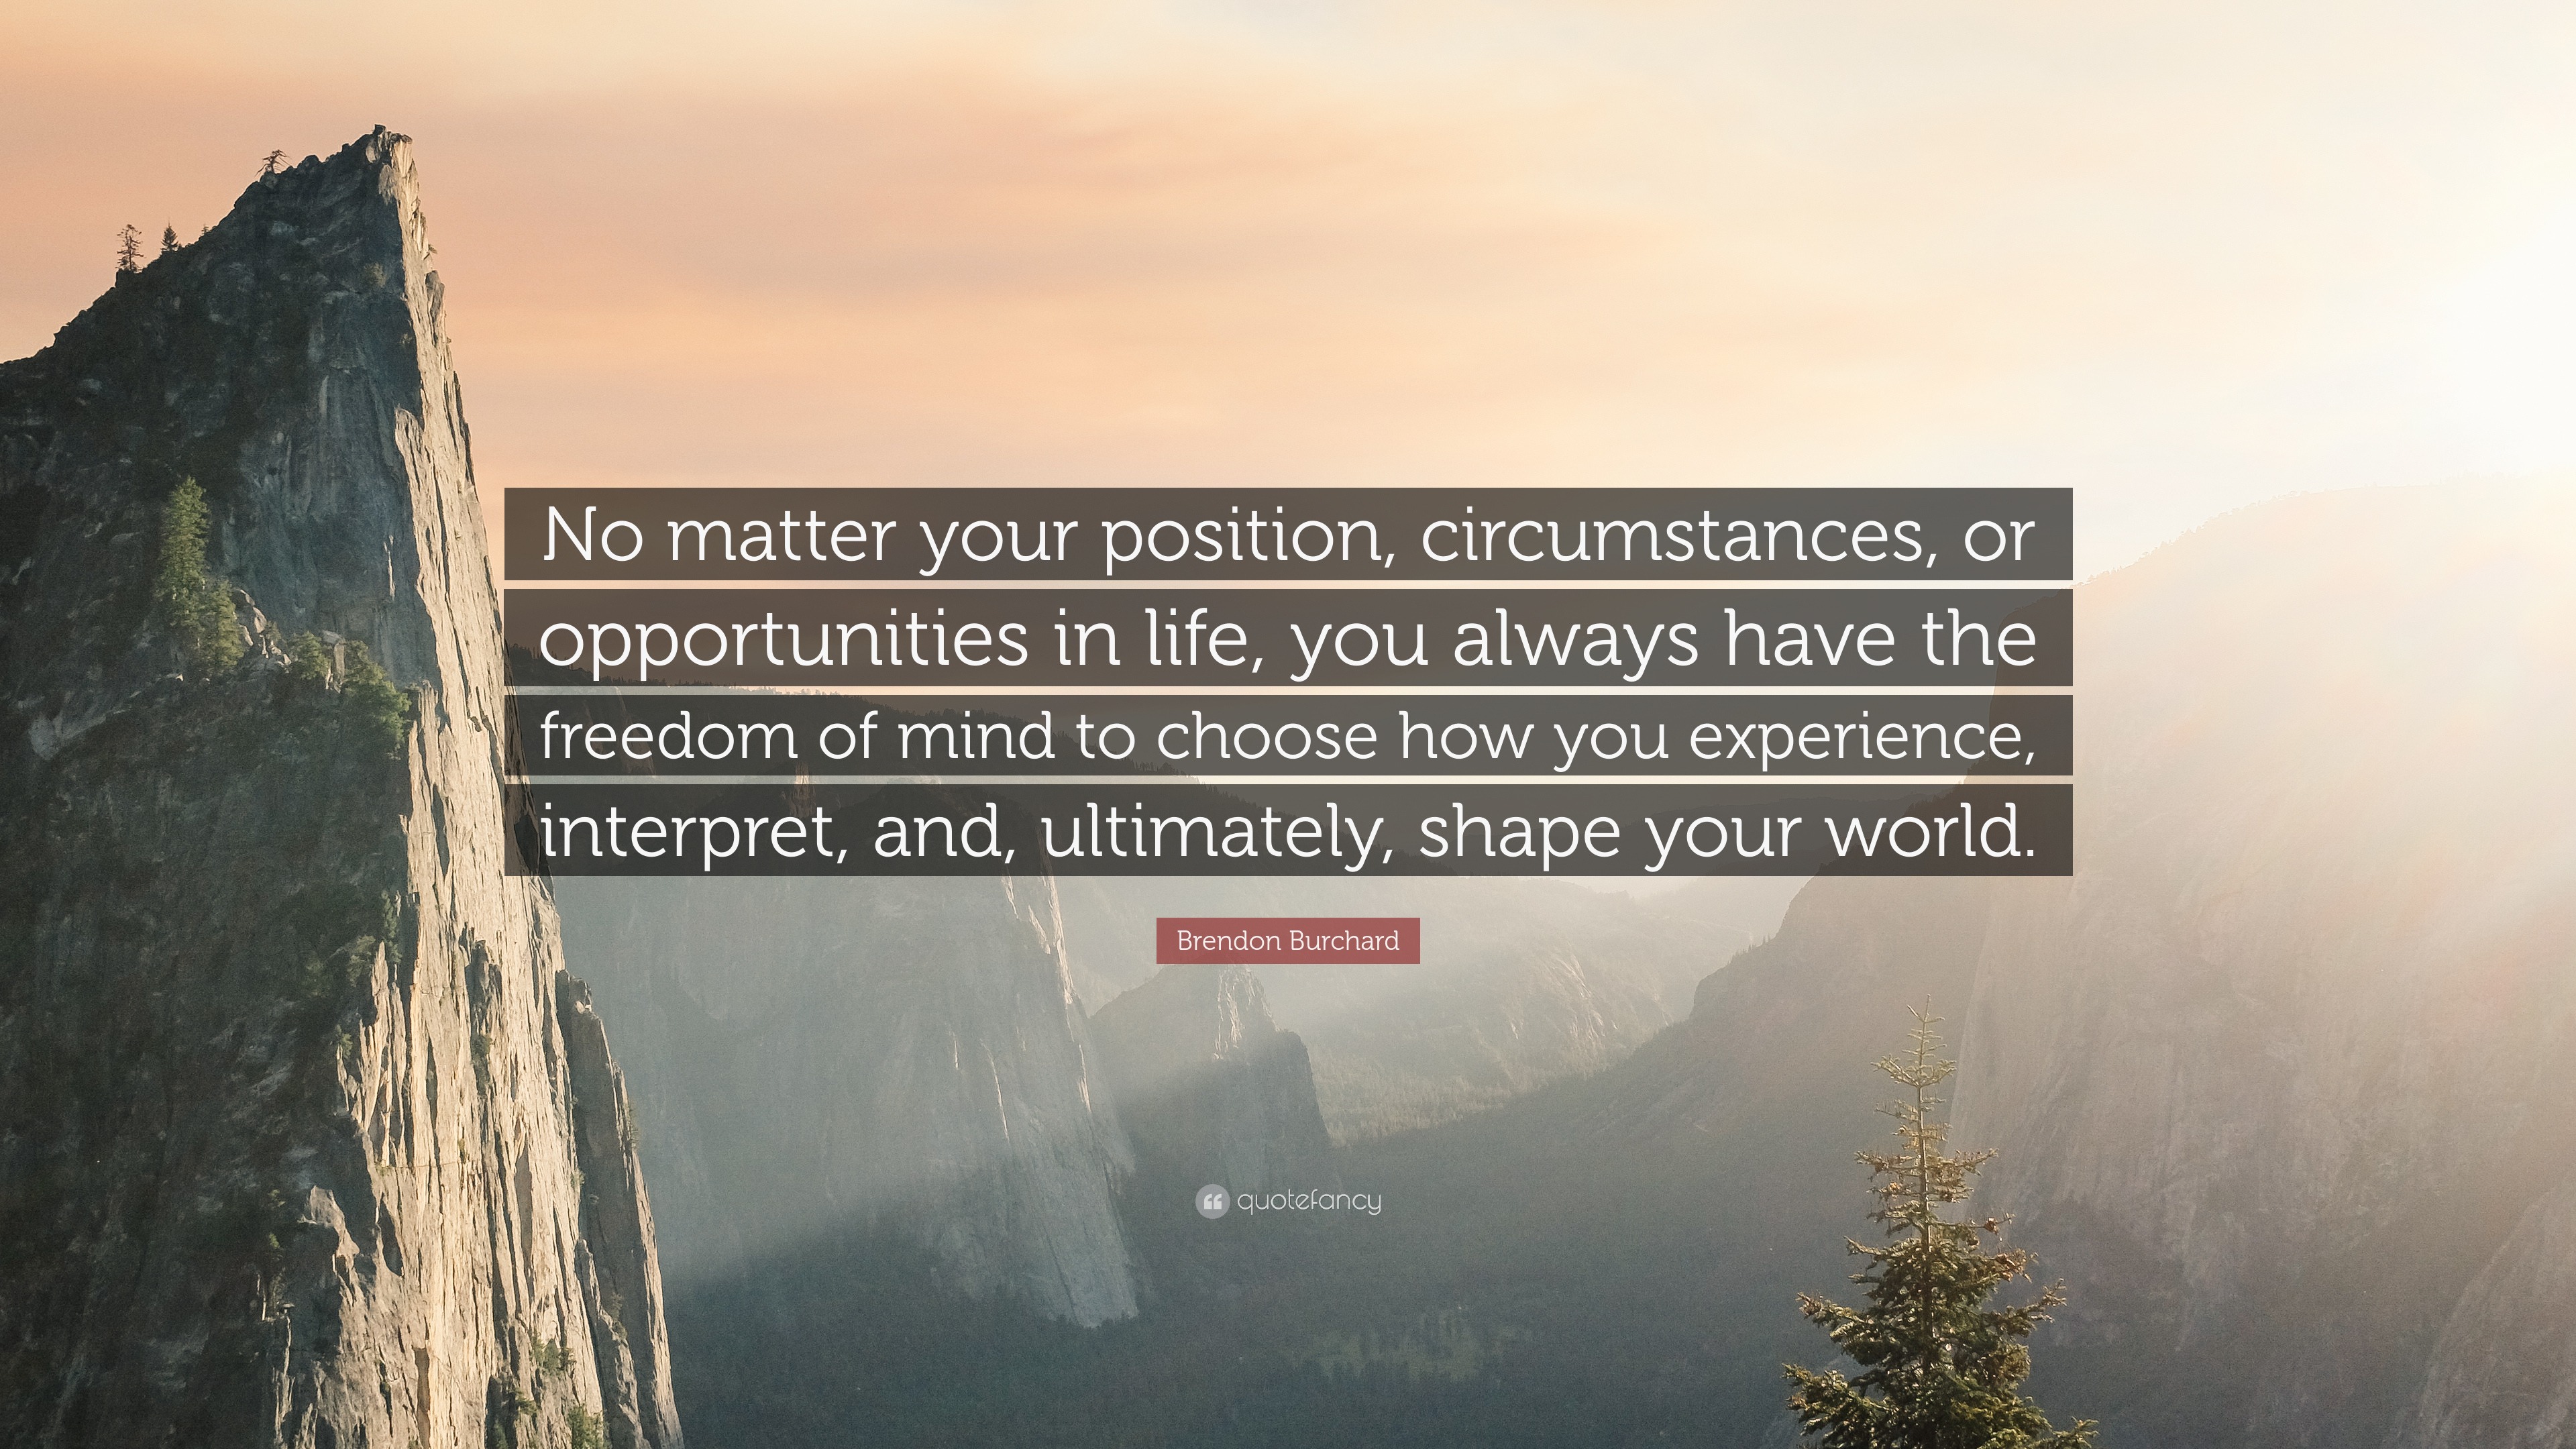 Brendon Burchard Quote: “No matter your position, circumstances